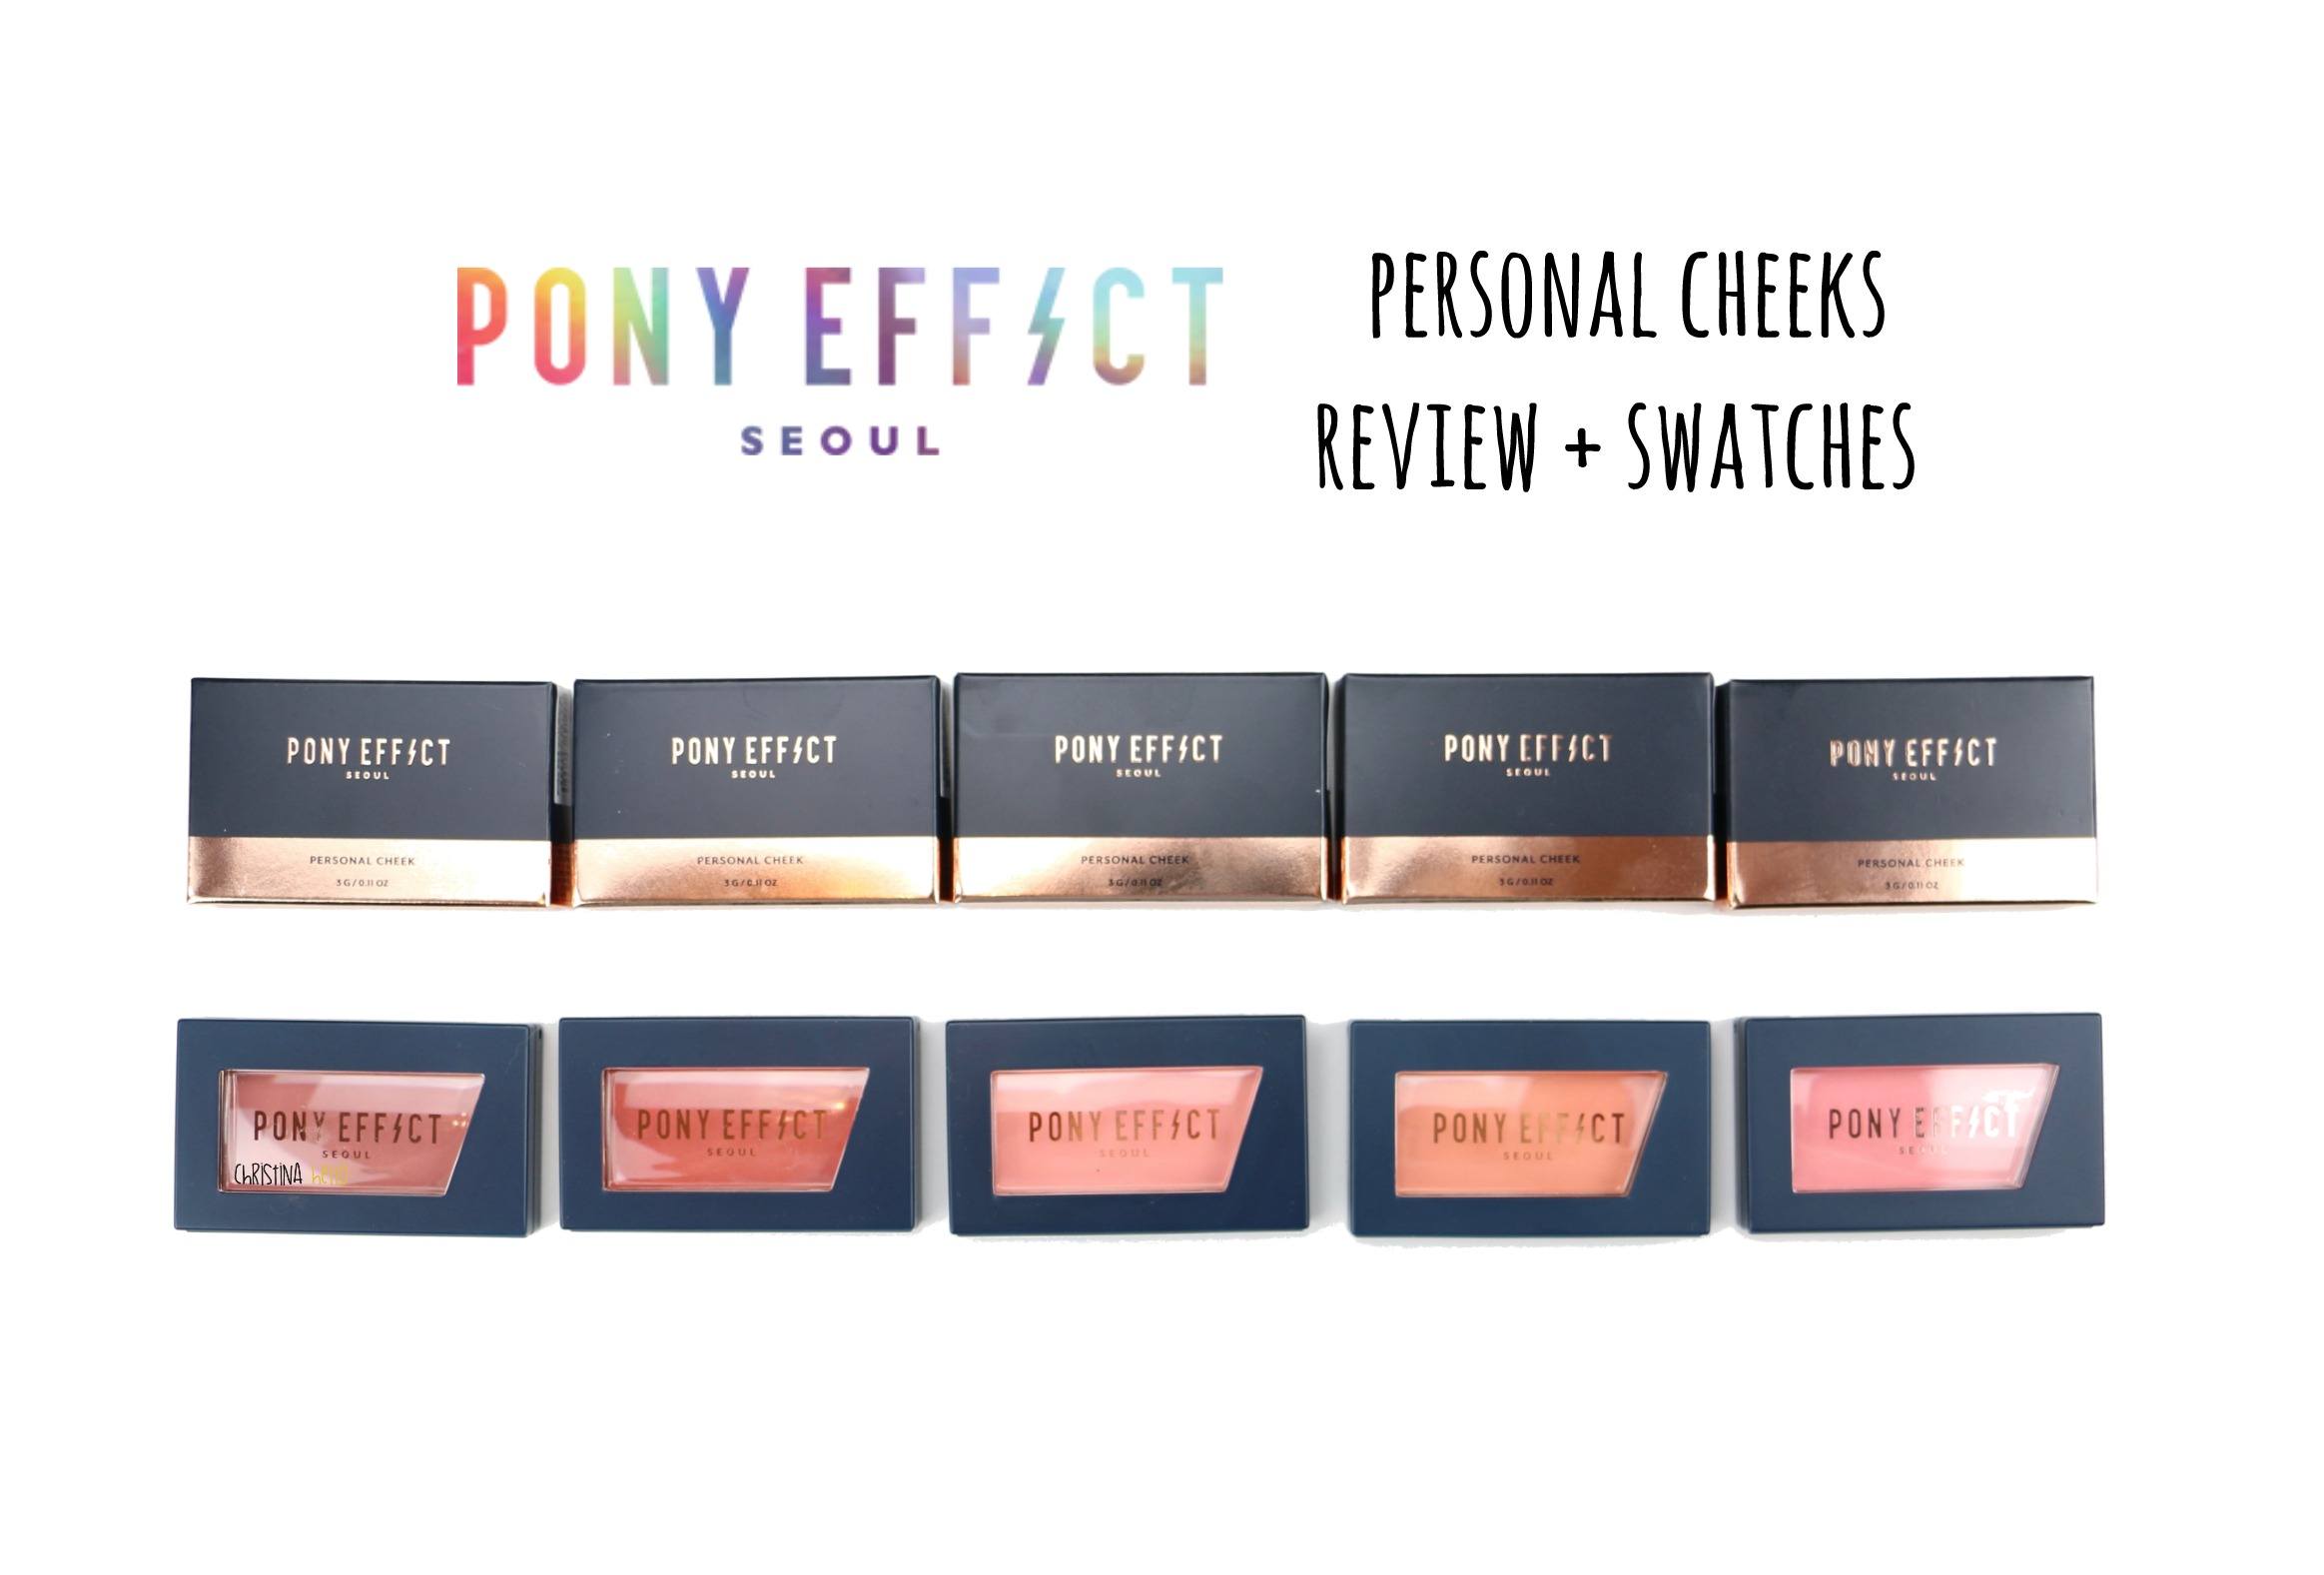 Pony effect personal cheeks review and swatches